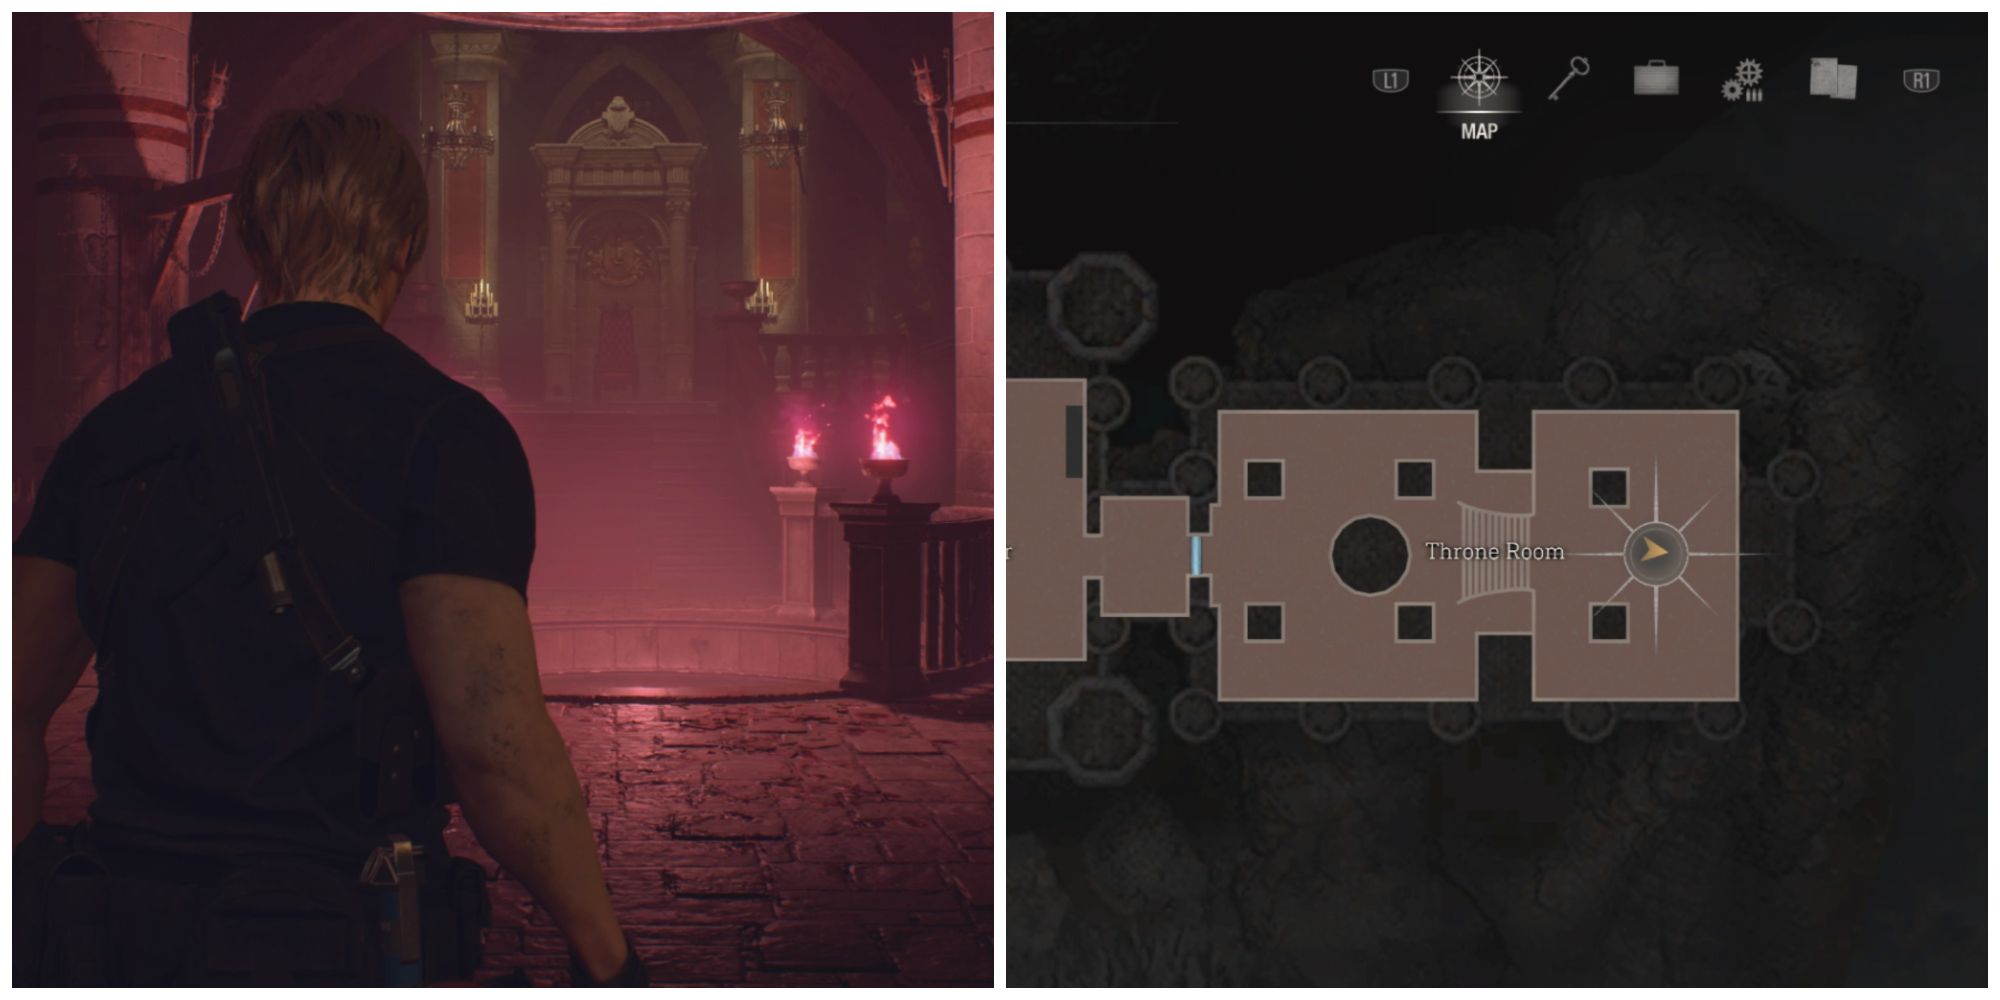 Leon and the Throne Room location in Resident Evil 4 remake